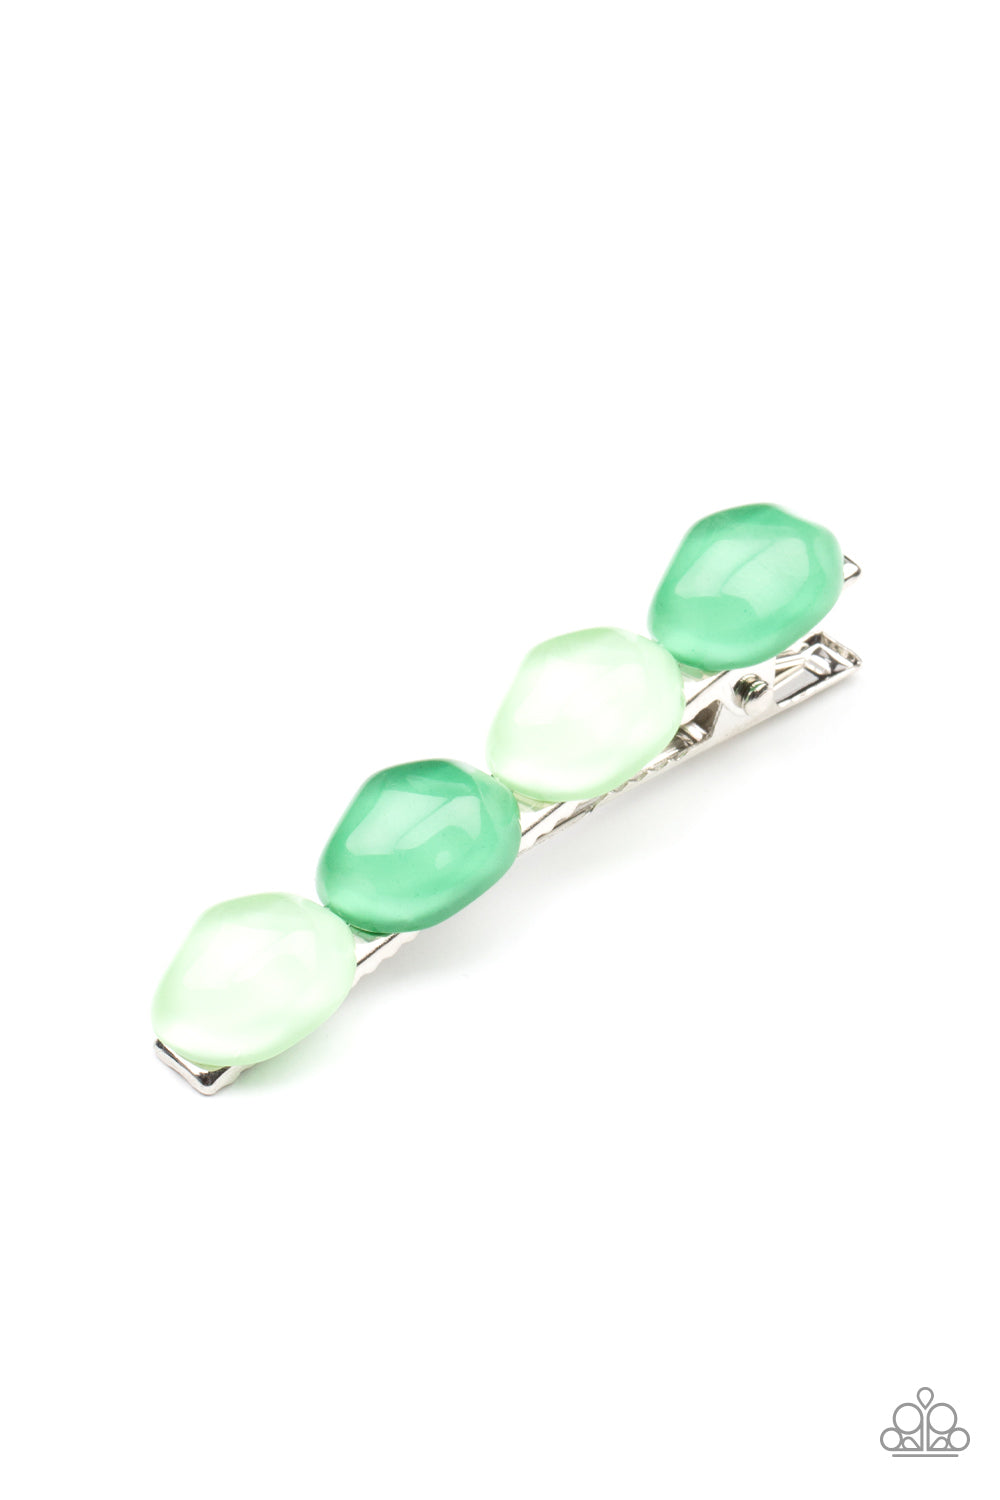 PRE-ORDER - Paparazzi Bubbly Reflections - Green - Hair Clip Bobby Pin - $5 Jewelry with Ashley Swint